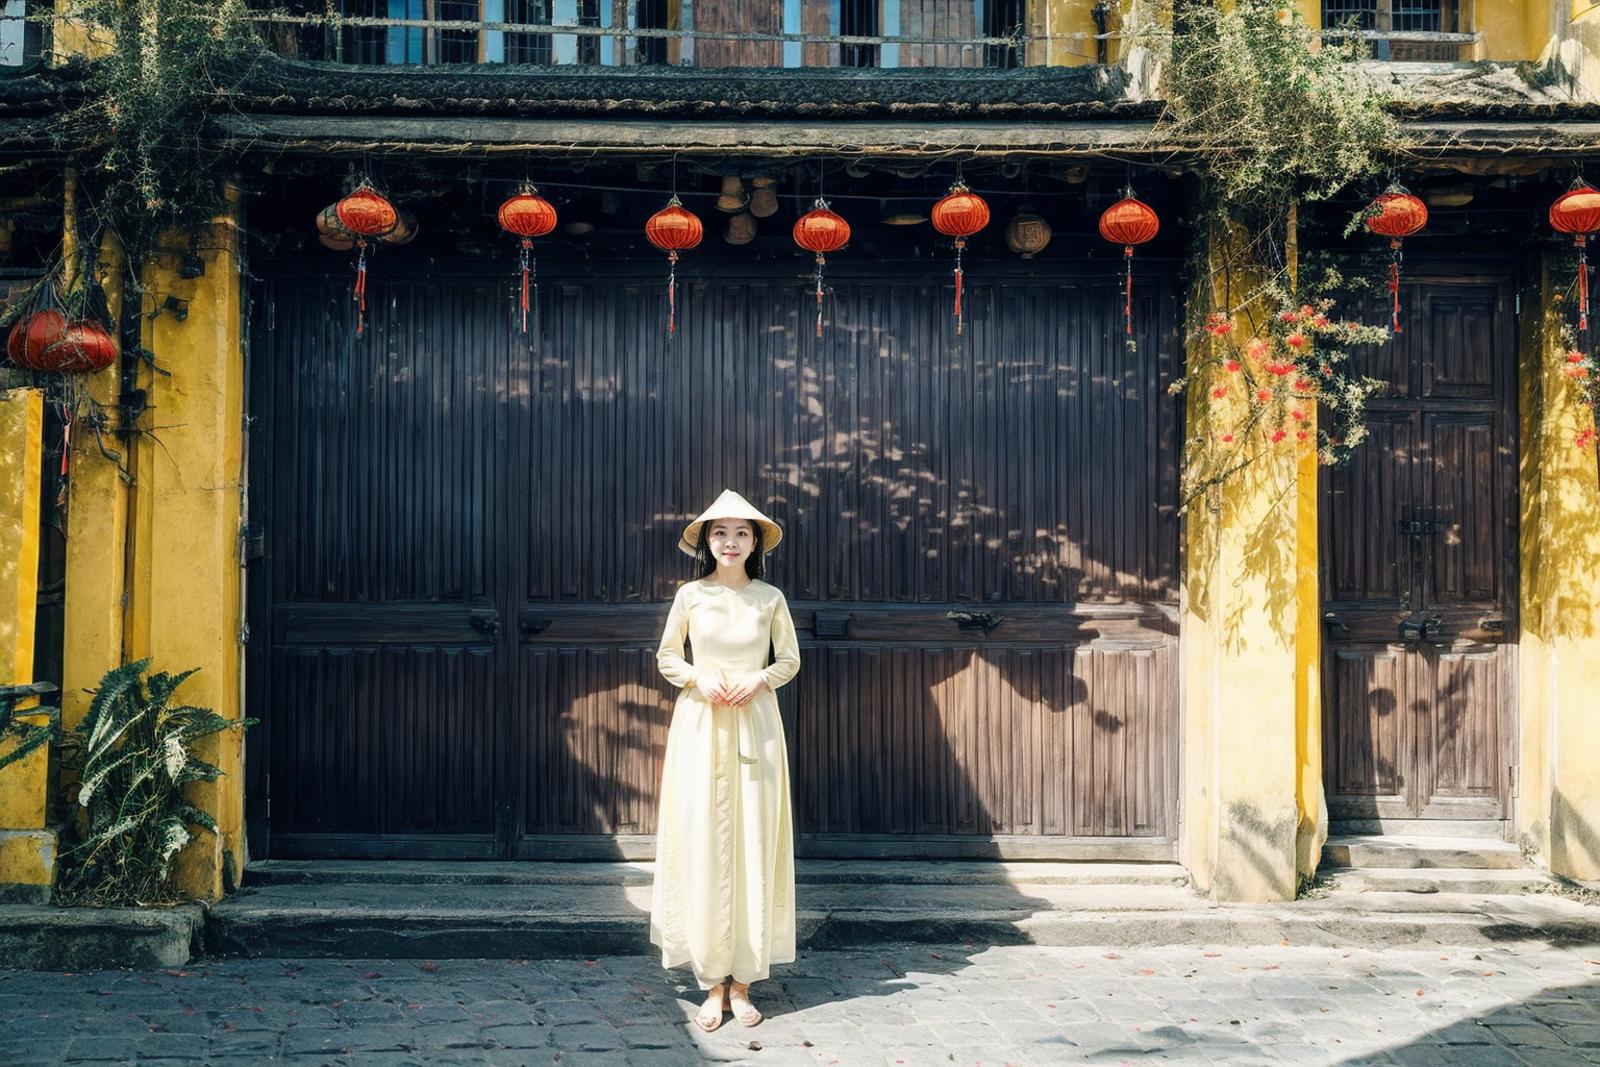 TQ - Hoi An ancient town | Phố cổ Hội An | Background LoRA image by TracQuoc